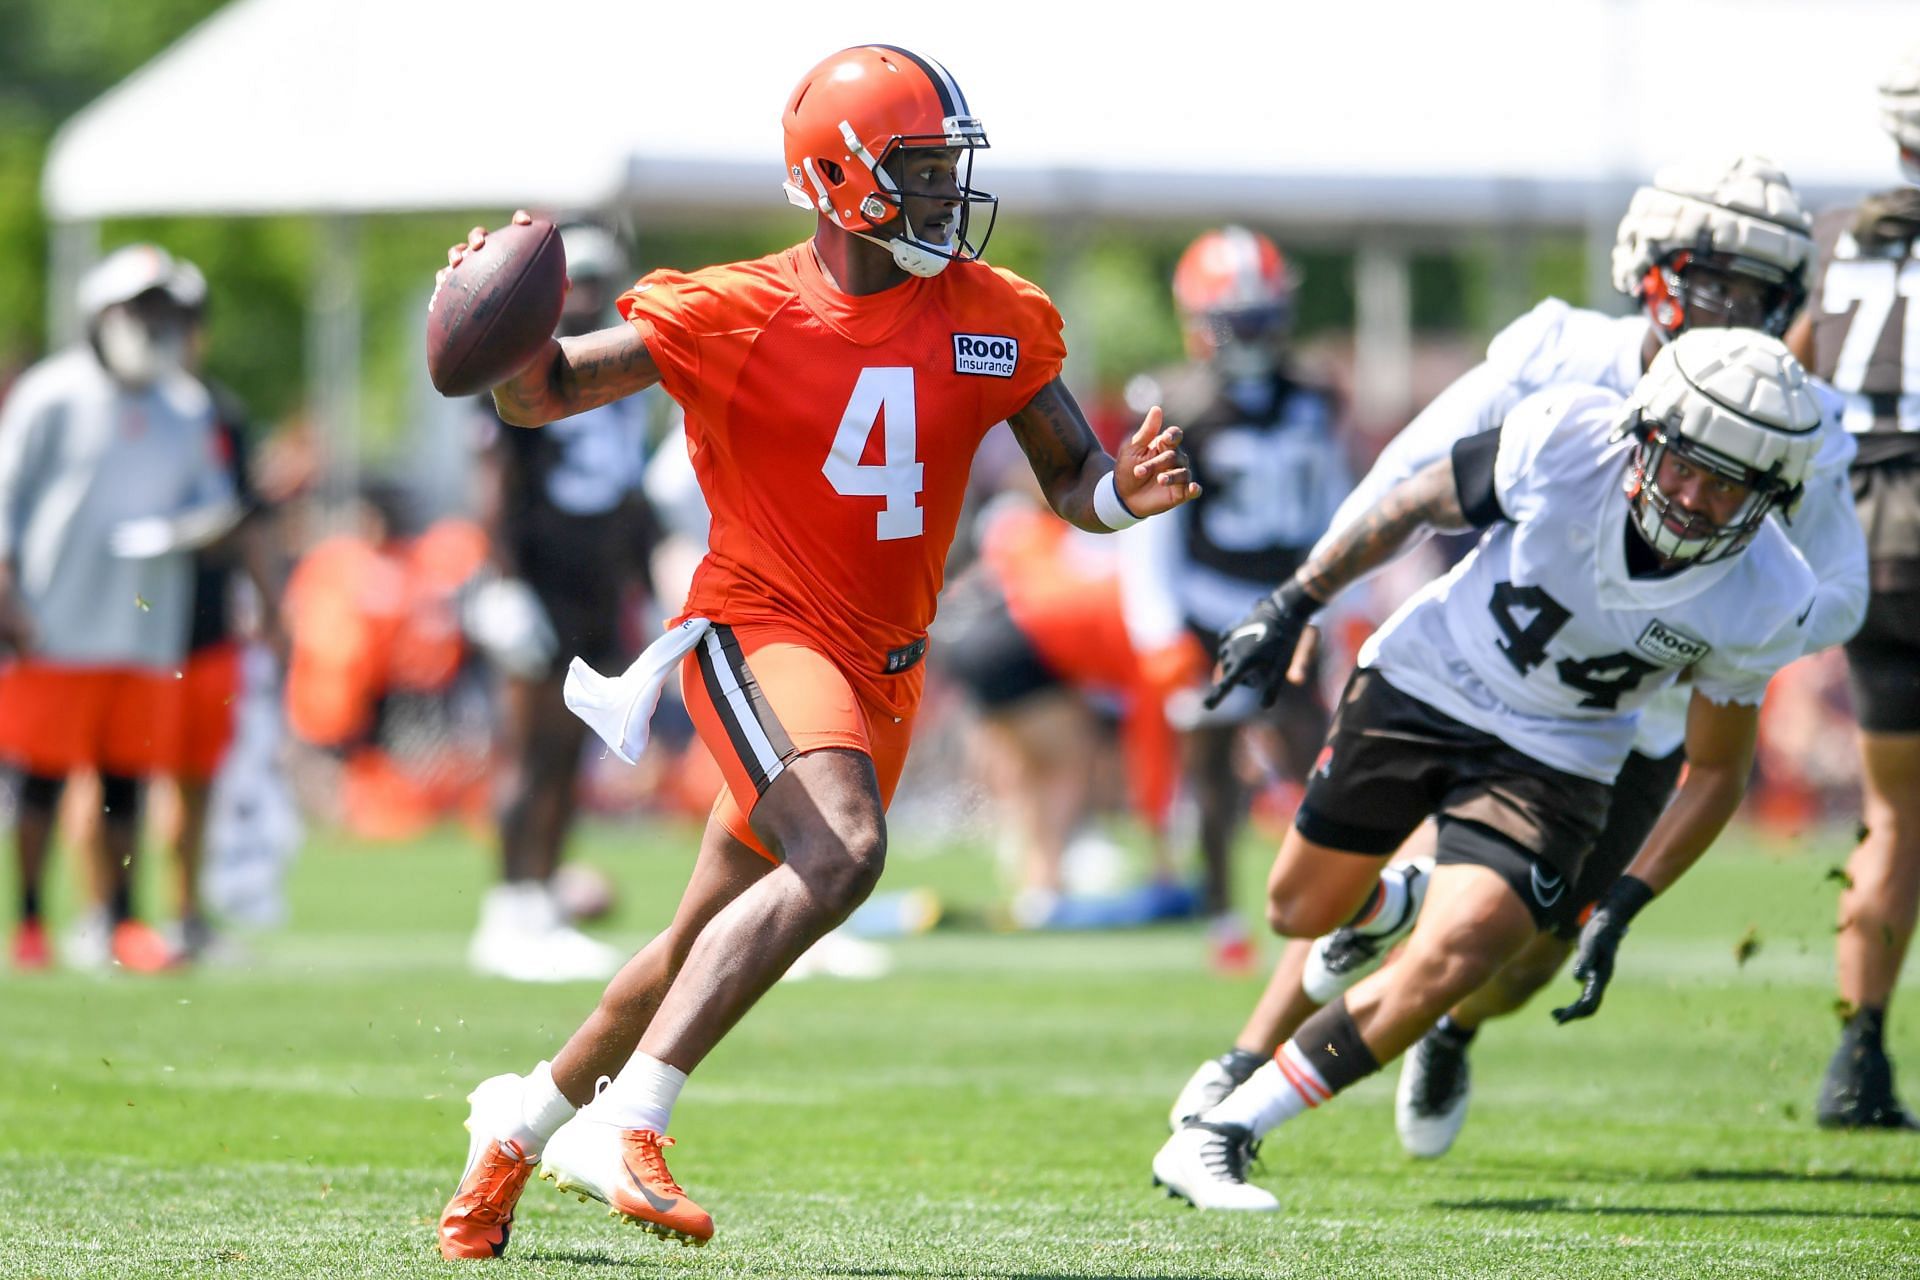 Cleveland Browns quarterback Deshaun Watson could face a suspension of a year or more